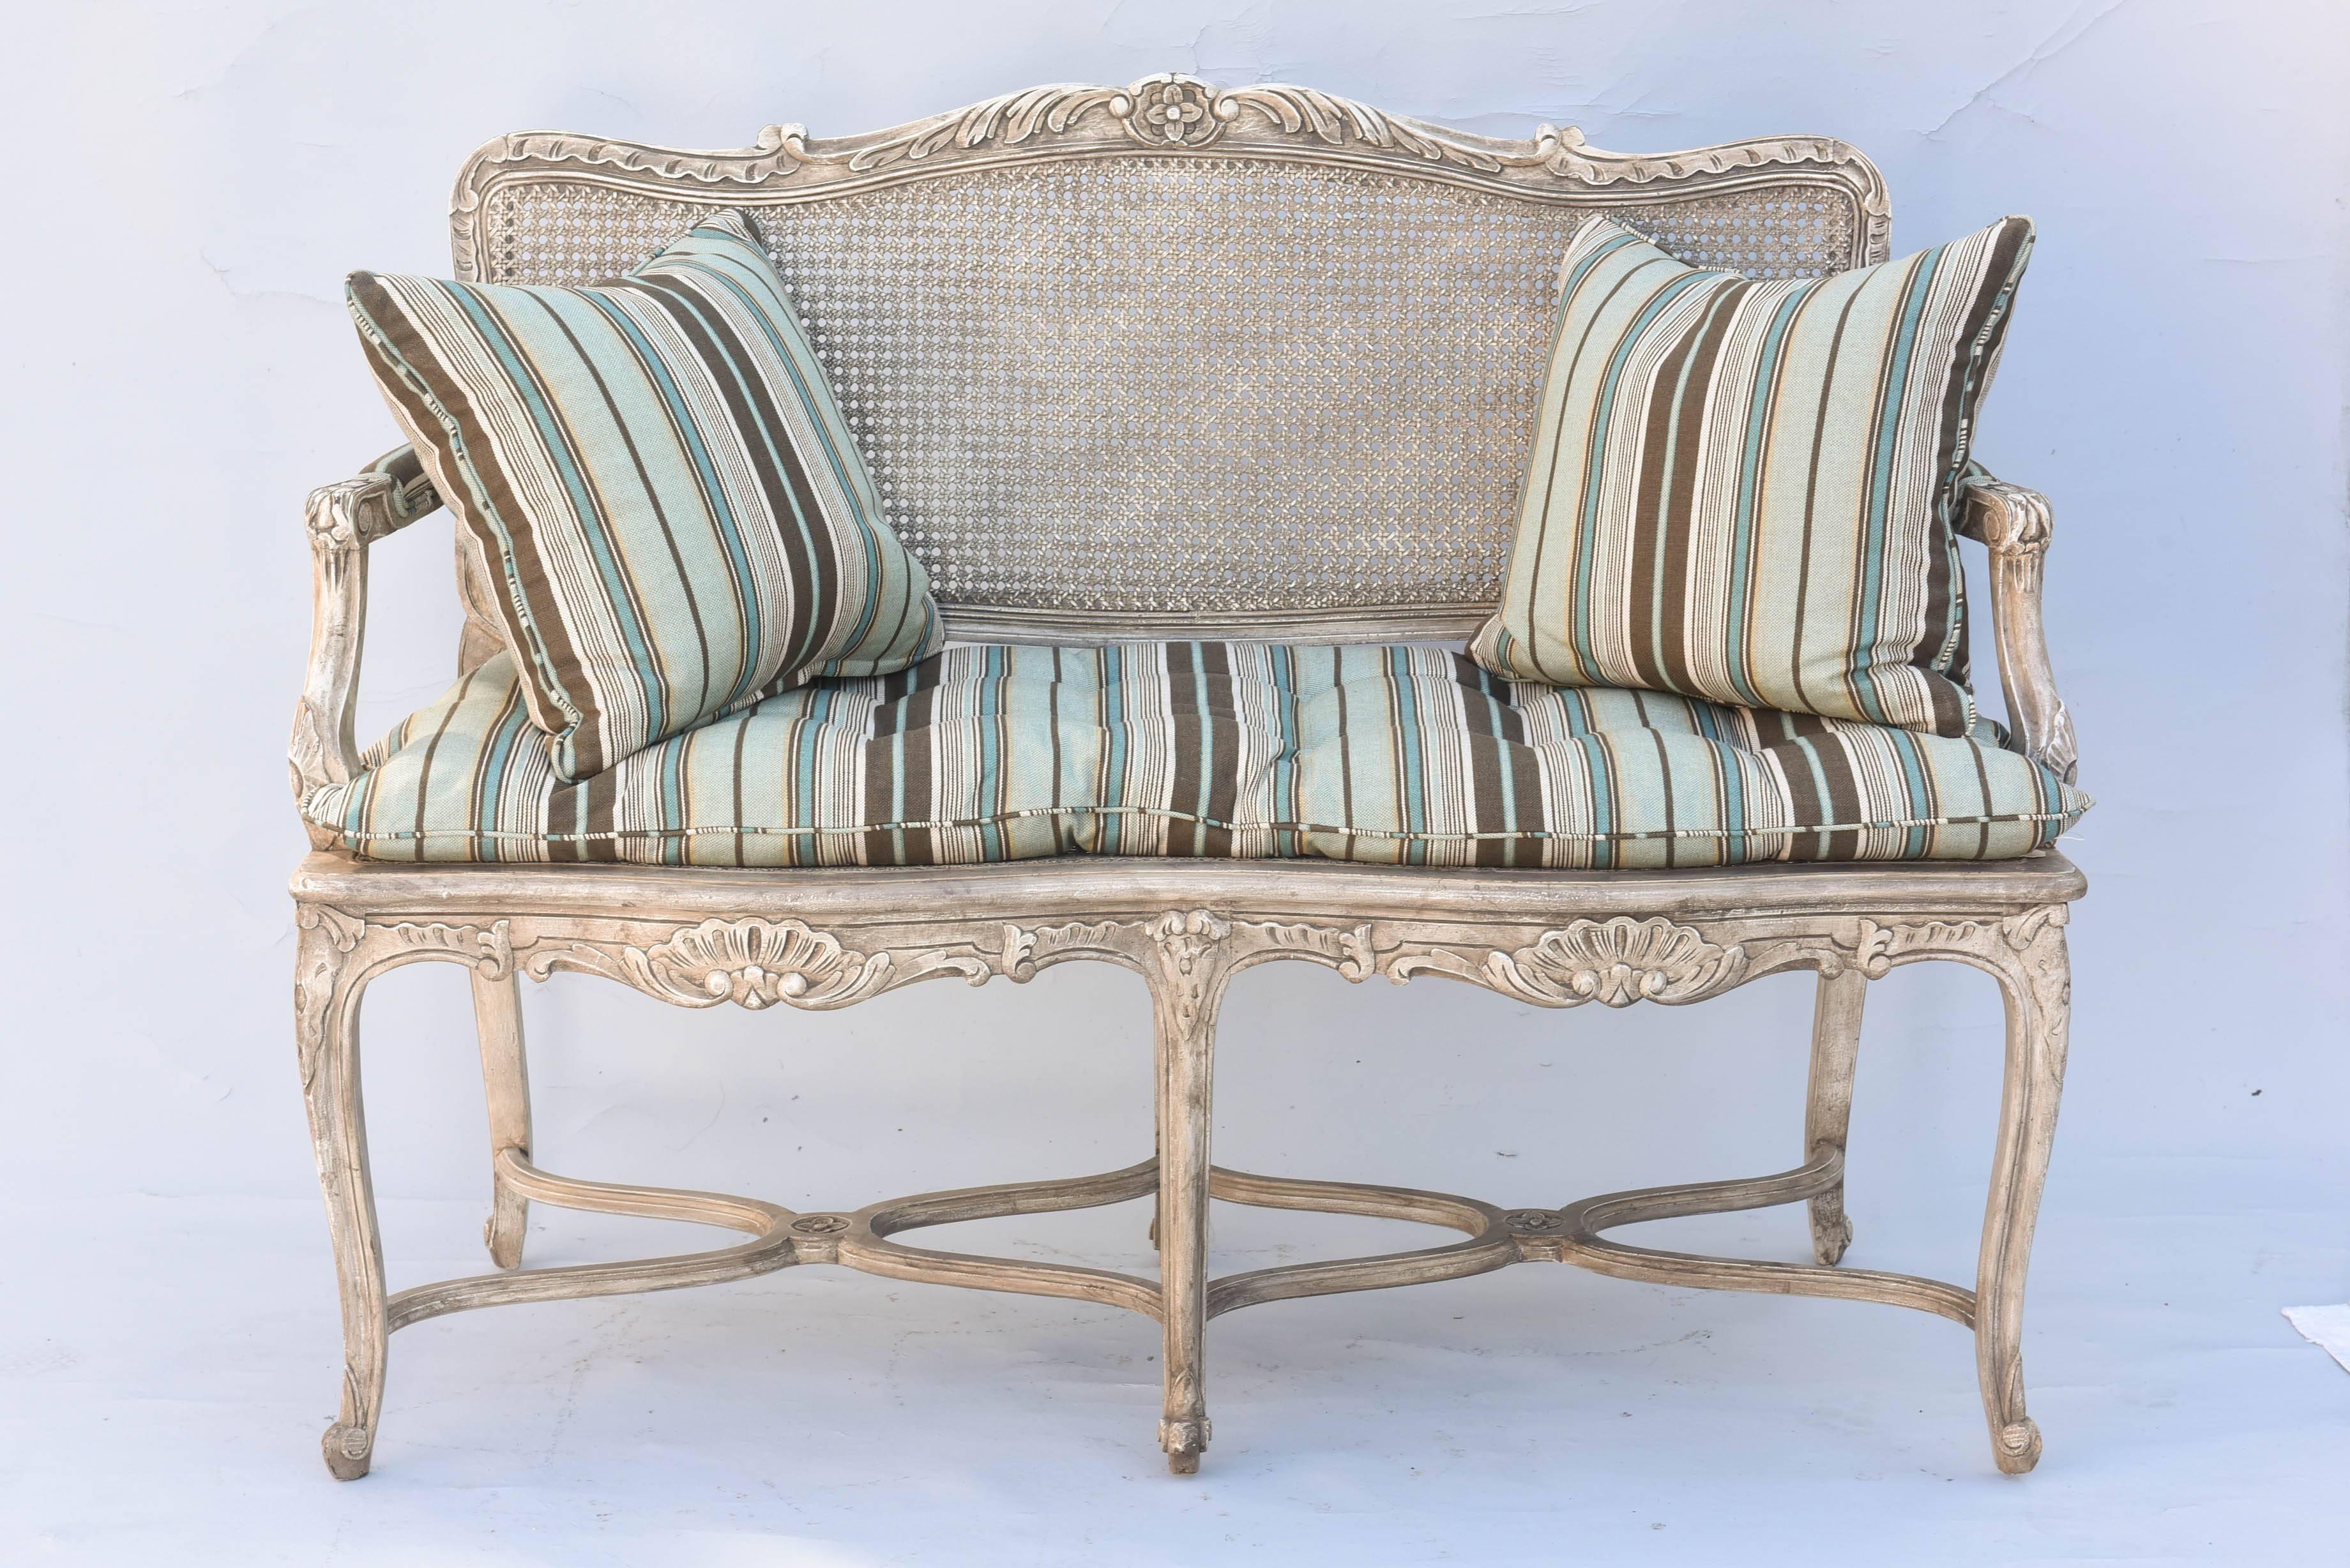 Settee, in Regence taste, having a painted frame, showing natural wear, its serpentine crest rail carved with a rosette, flanked by foliate ends, having a caned back and seat, with padded armrests, on downswept terminals, a loose cushion, on